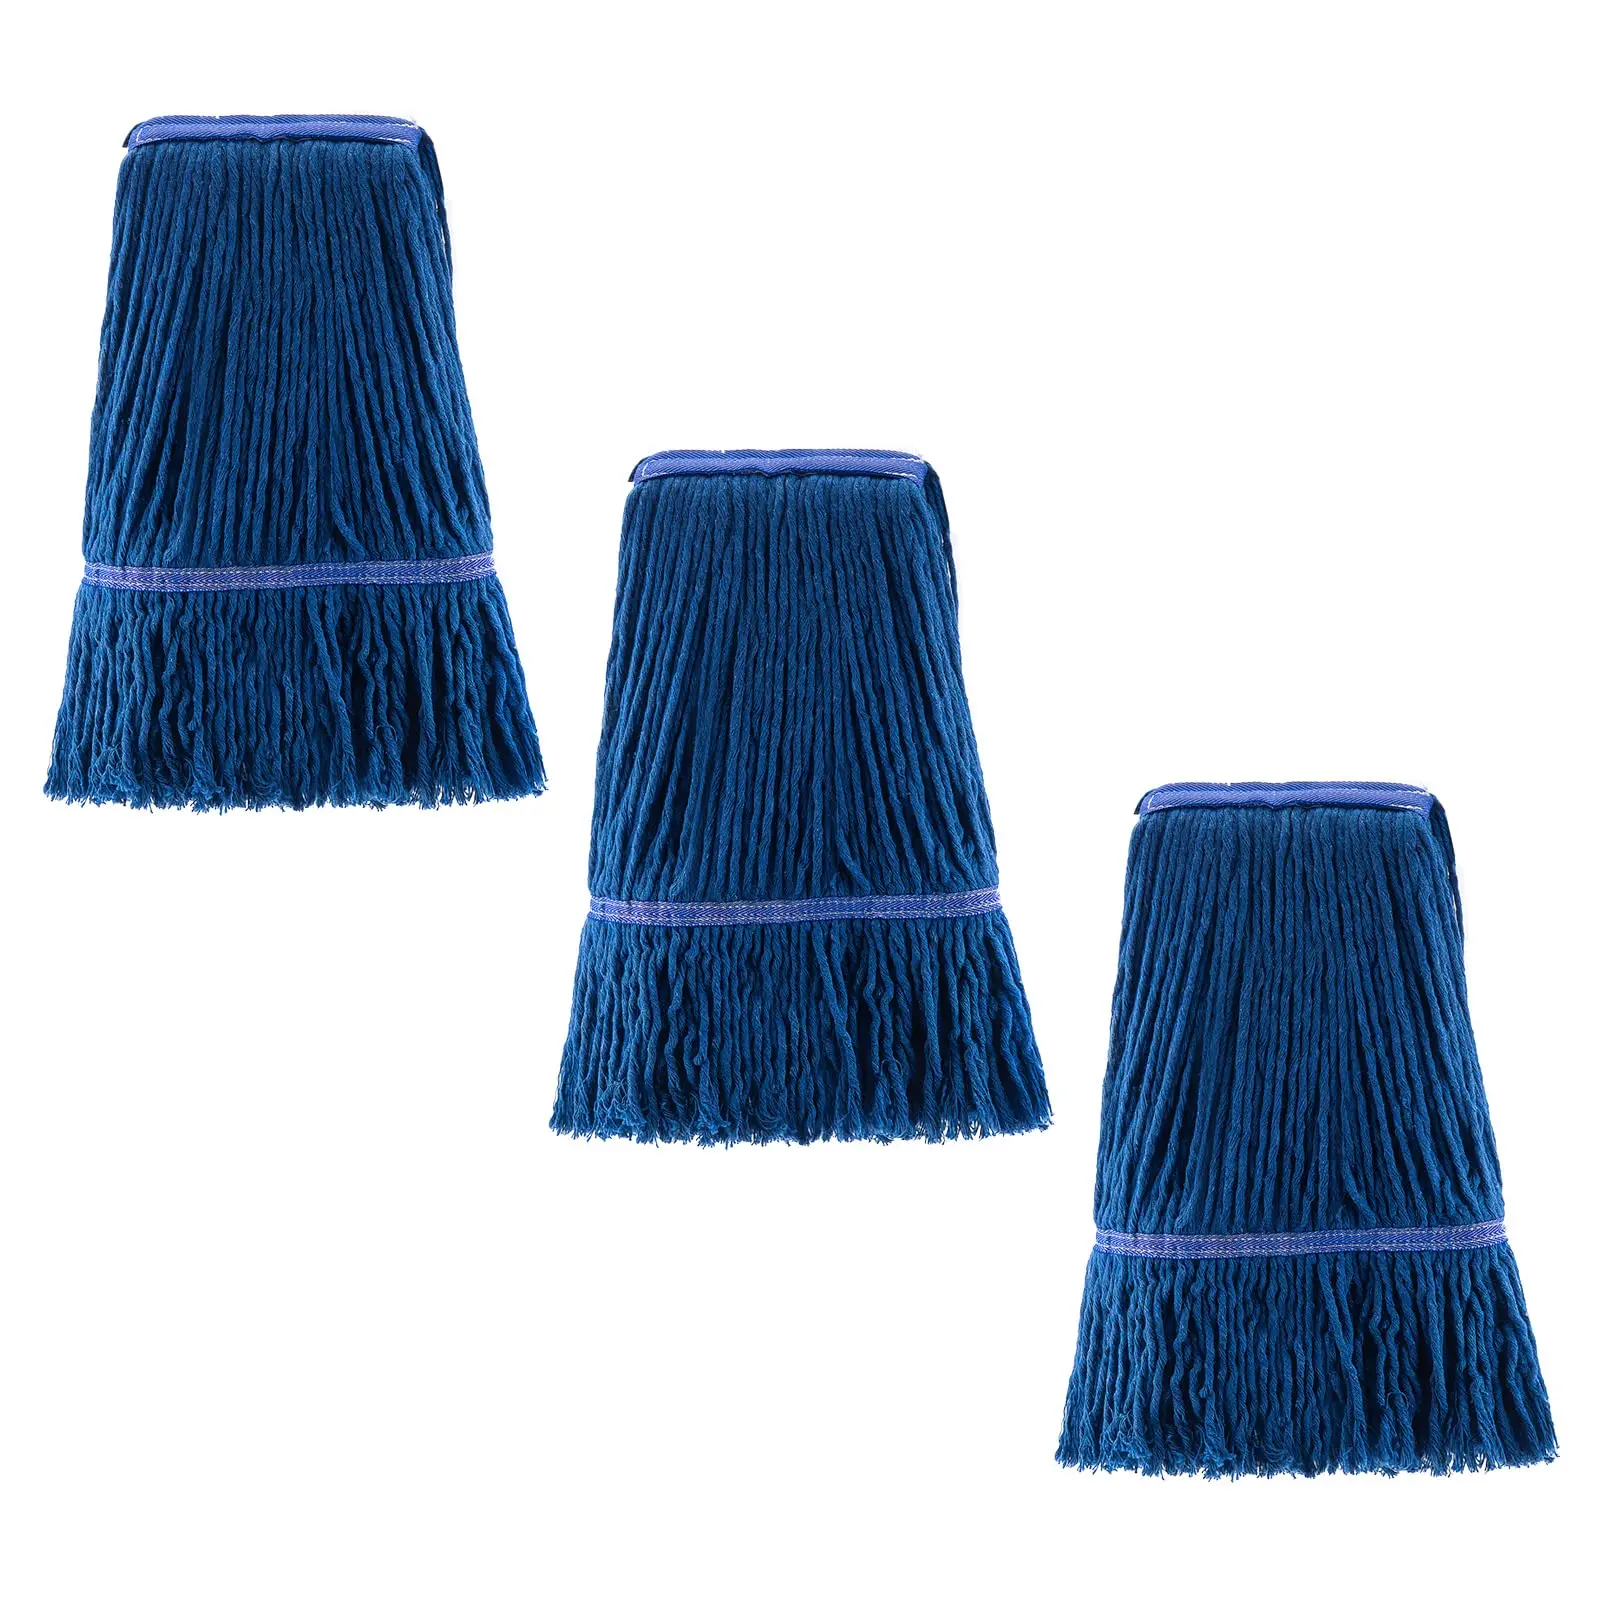 String Mop Heads Replacement Heavy Duty Commercial Grade Blue Cotton Looped End Wet Industrial Cleaning Mop Head Refills 6, Large 